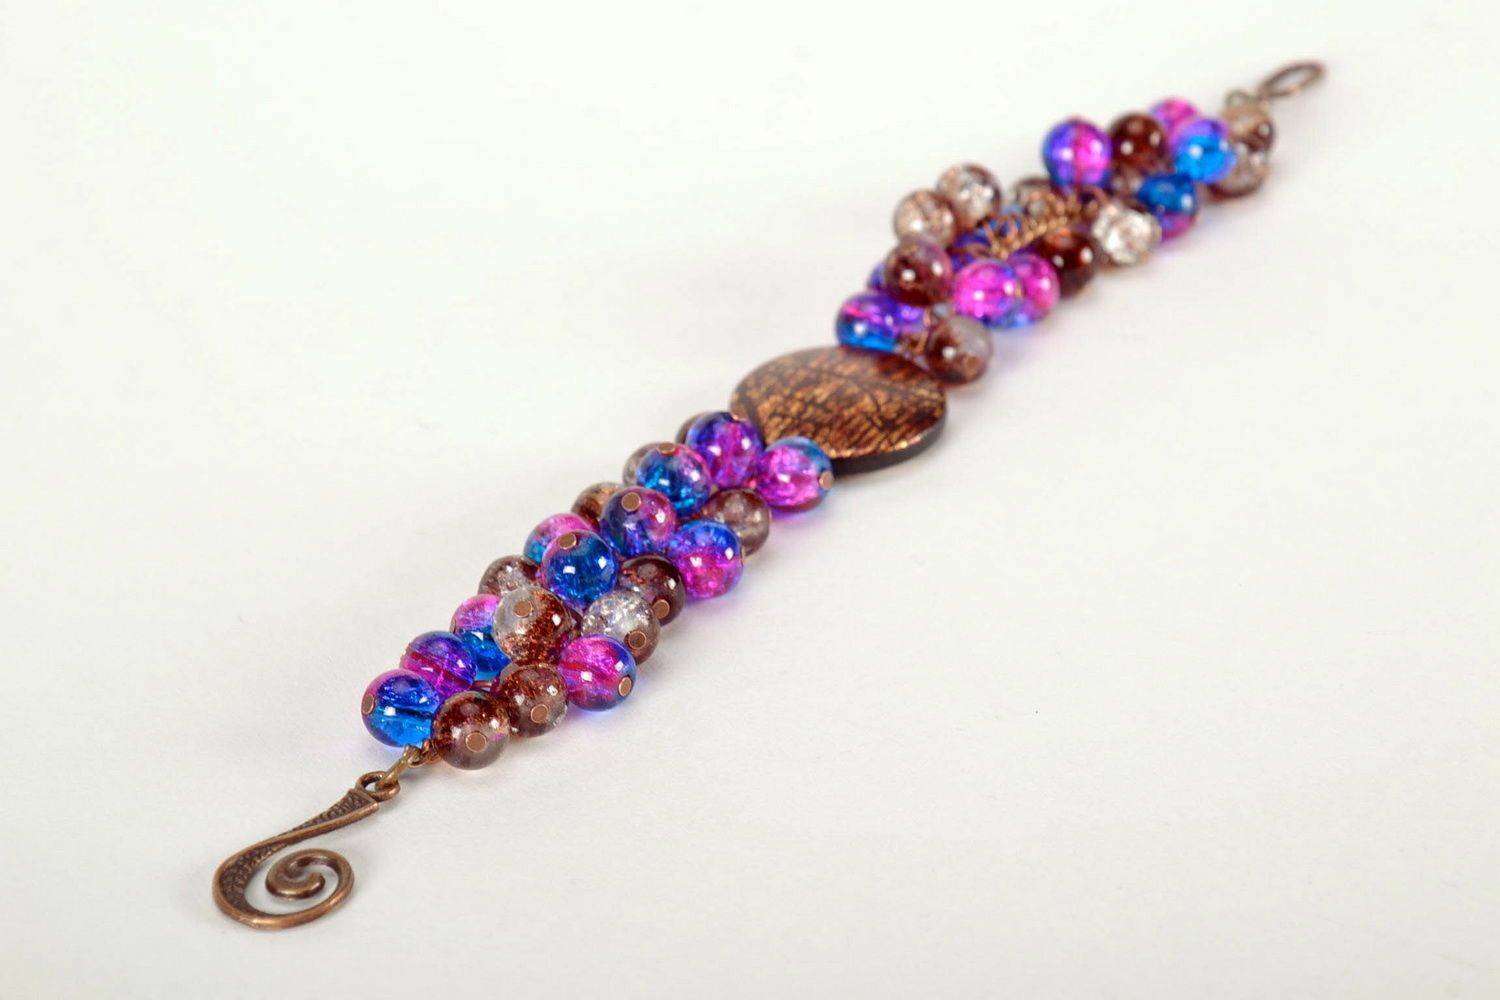 Handmade bracelet made from multi-colored beads photo 4